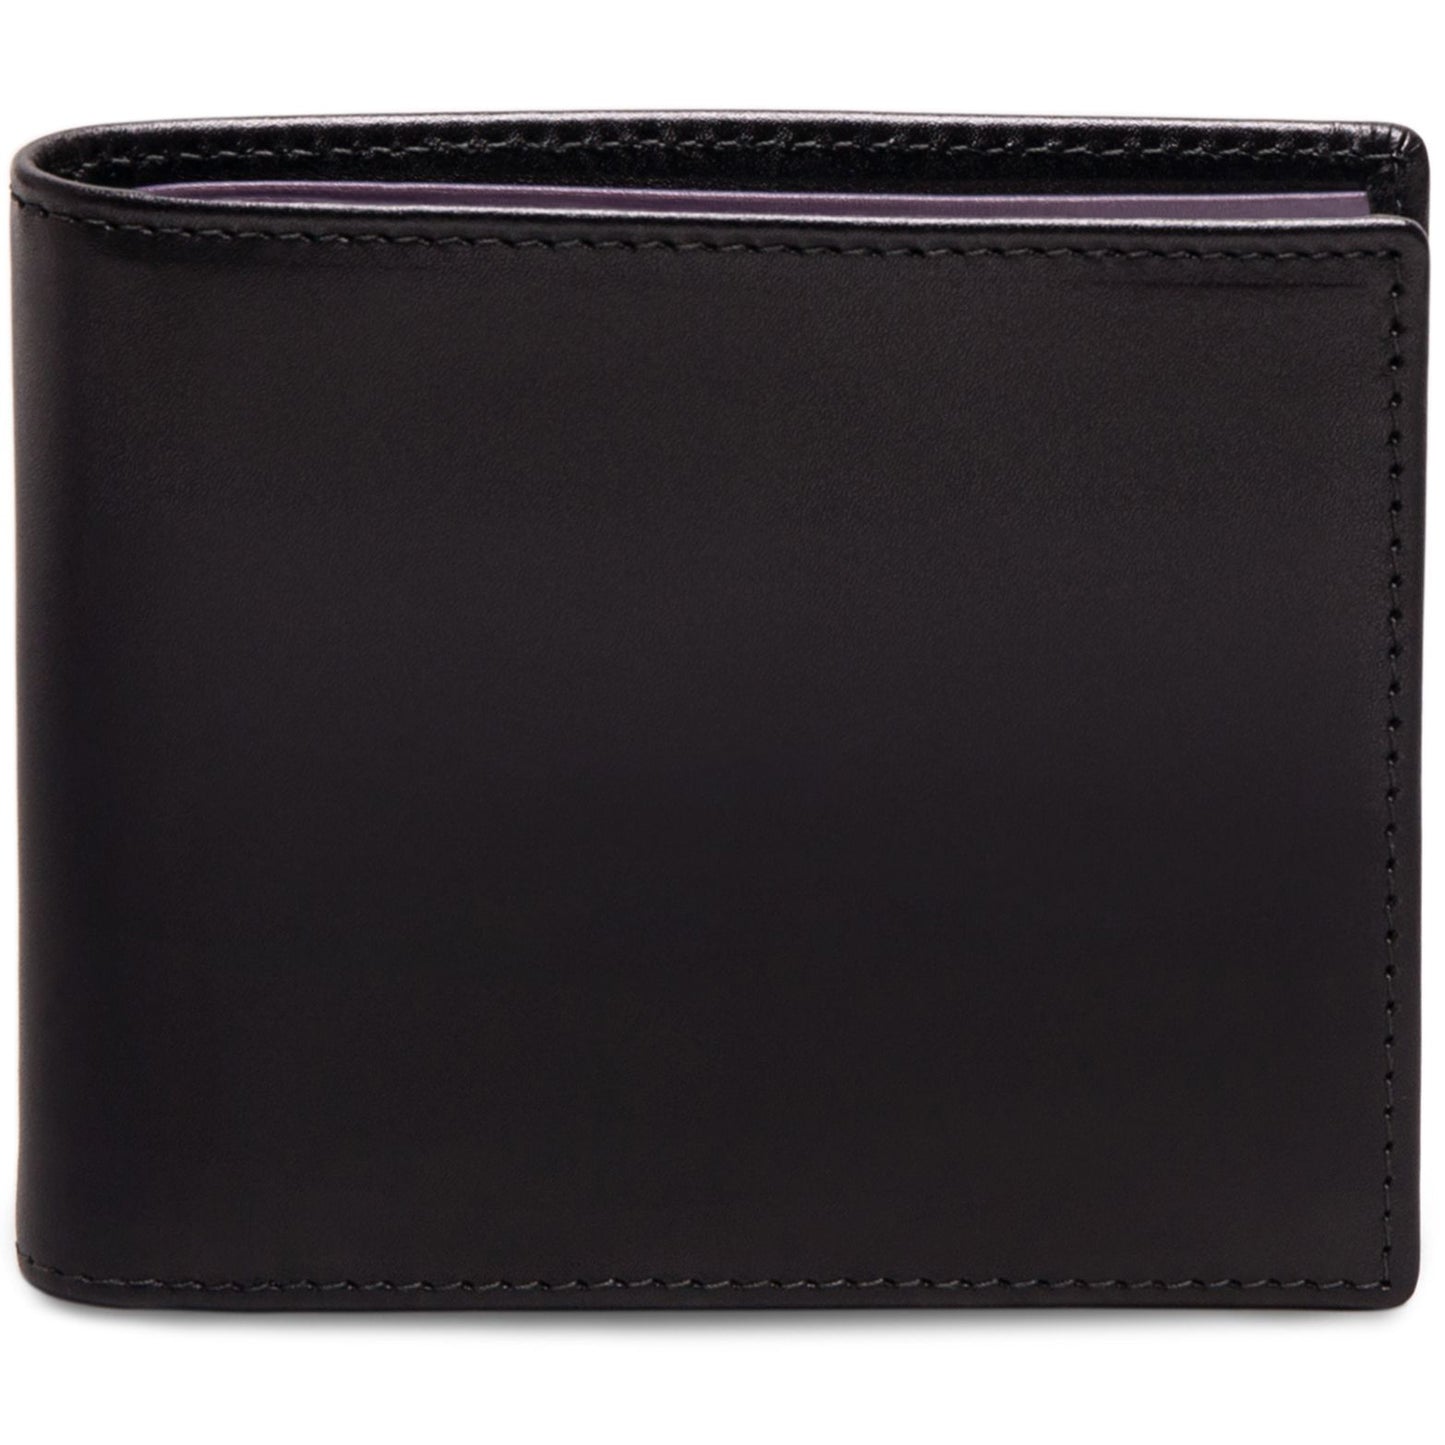 Ettinger Sterling Collection Billfold with 12 Credit Card Slips, Black/Purple